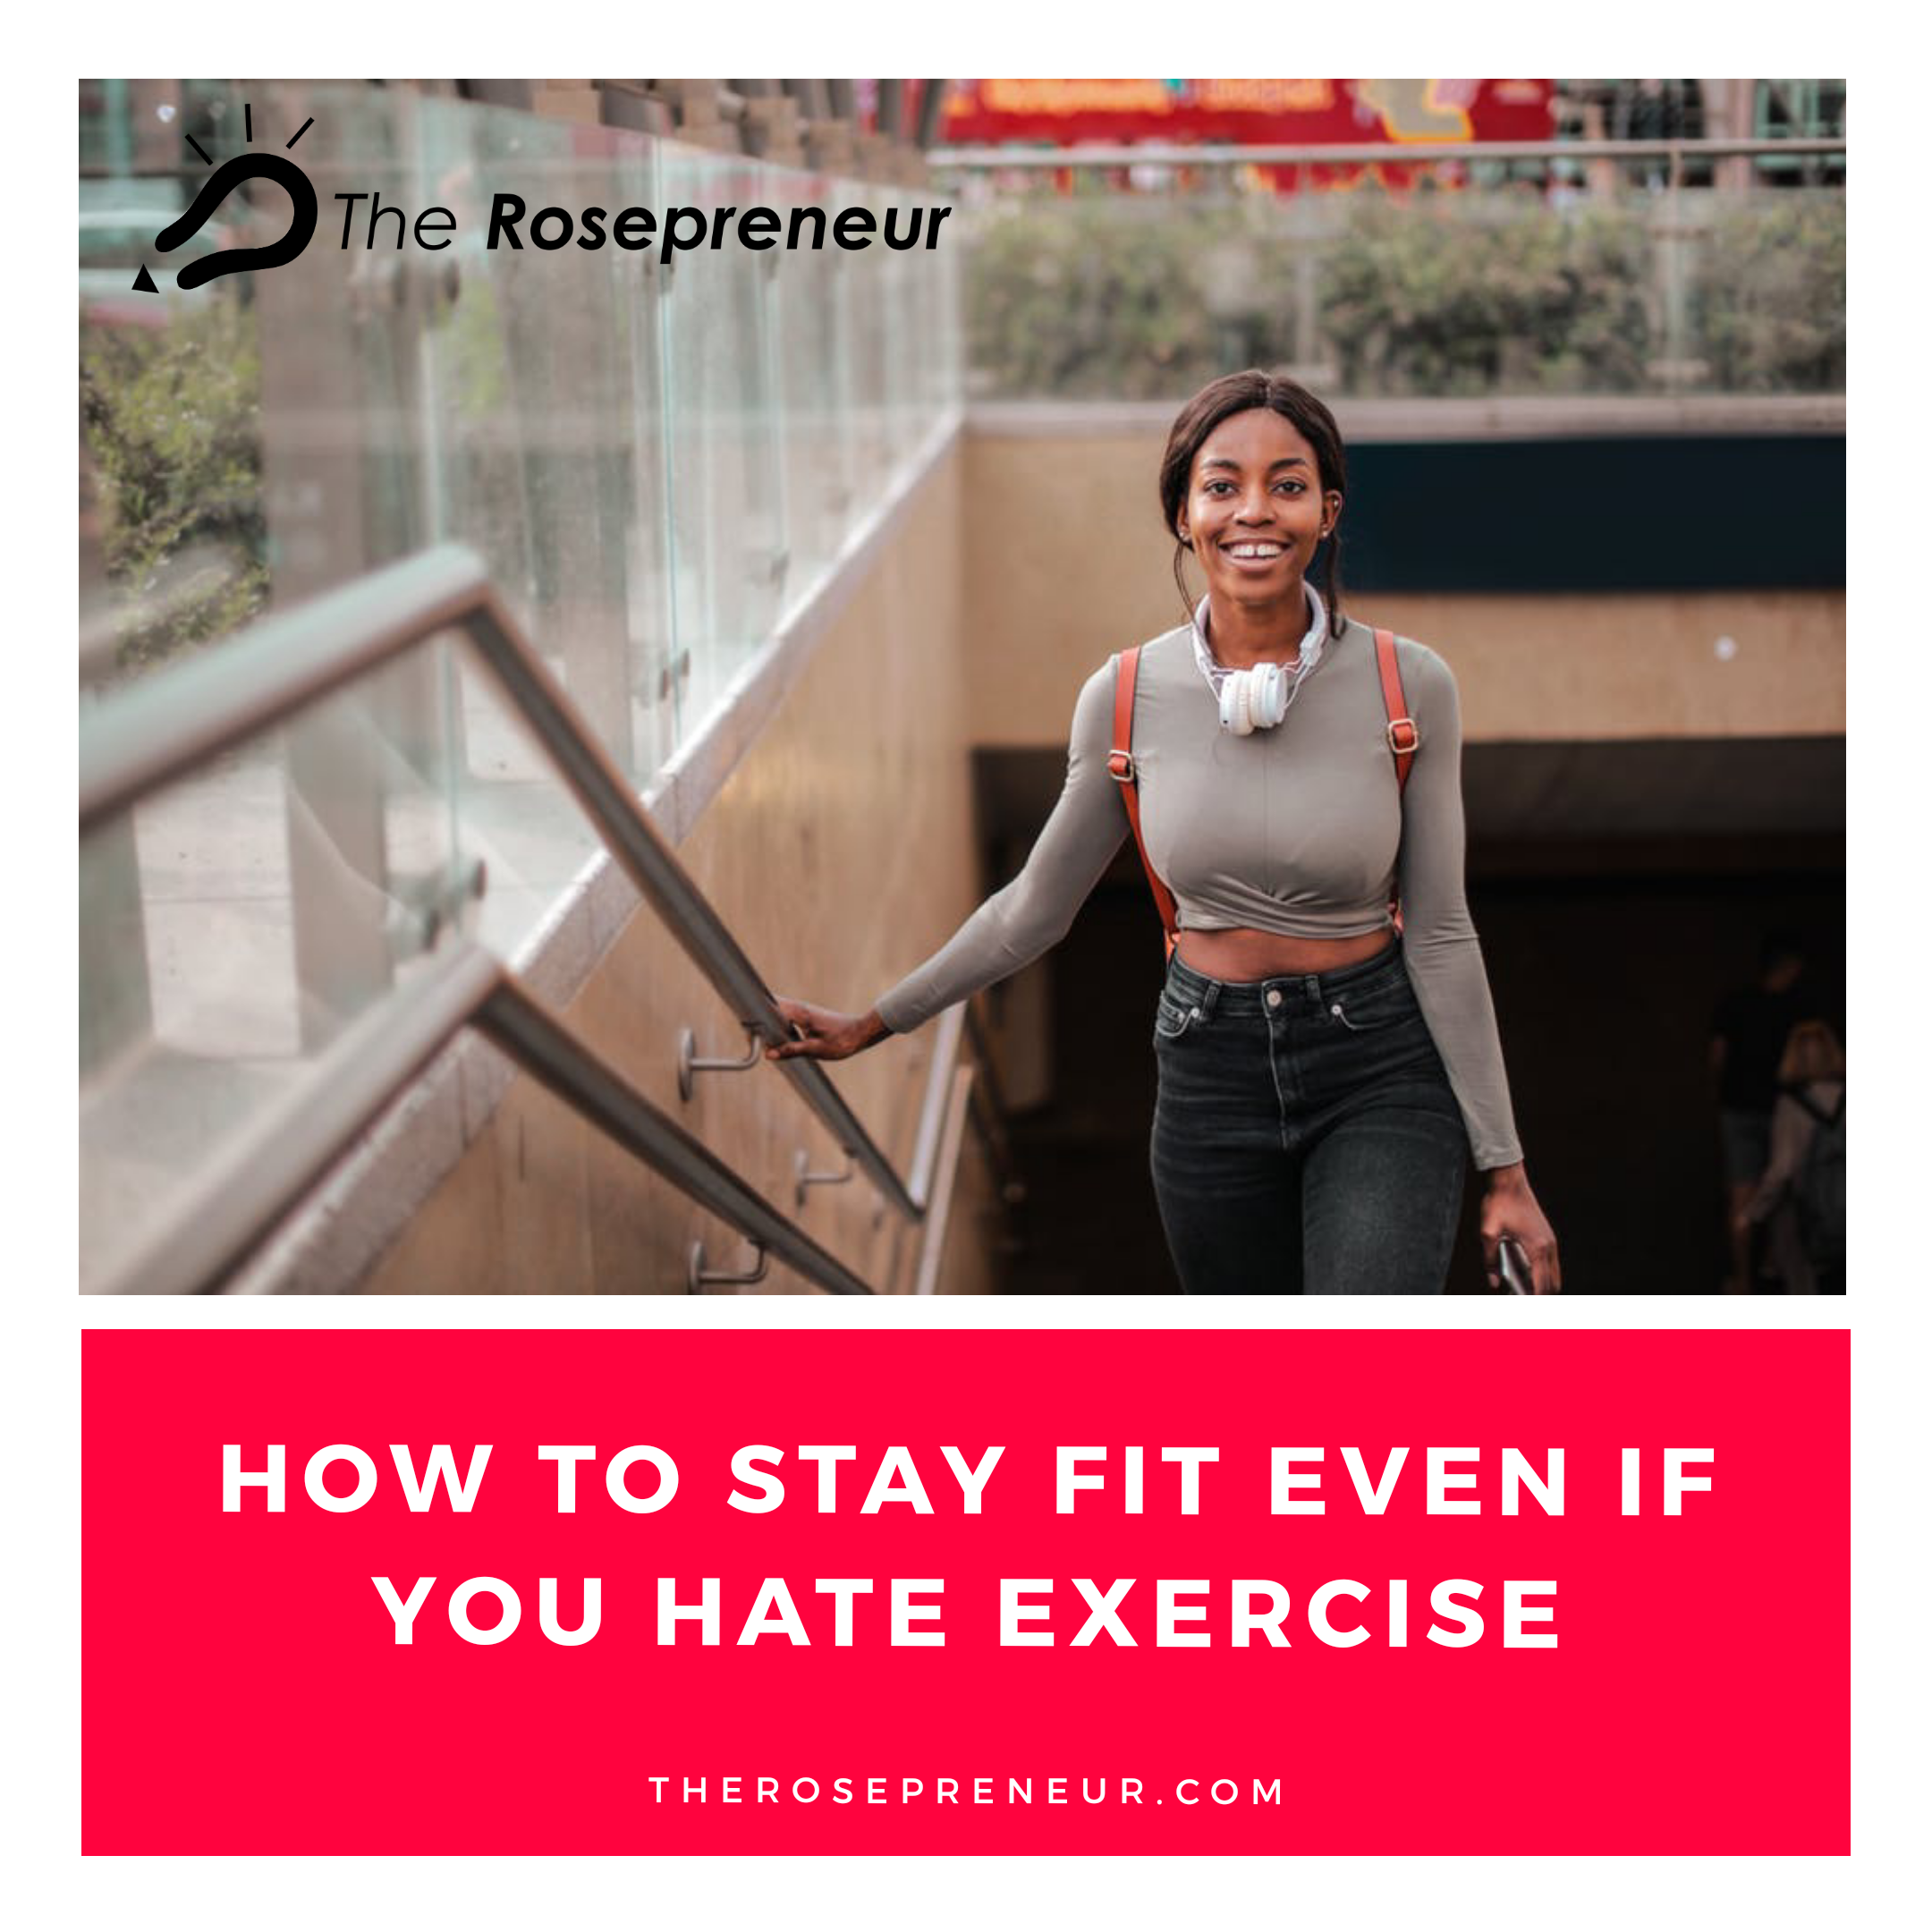 How To Stay Fit Even If You Hate Exercise